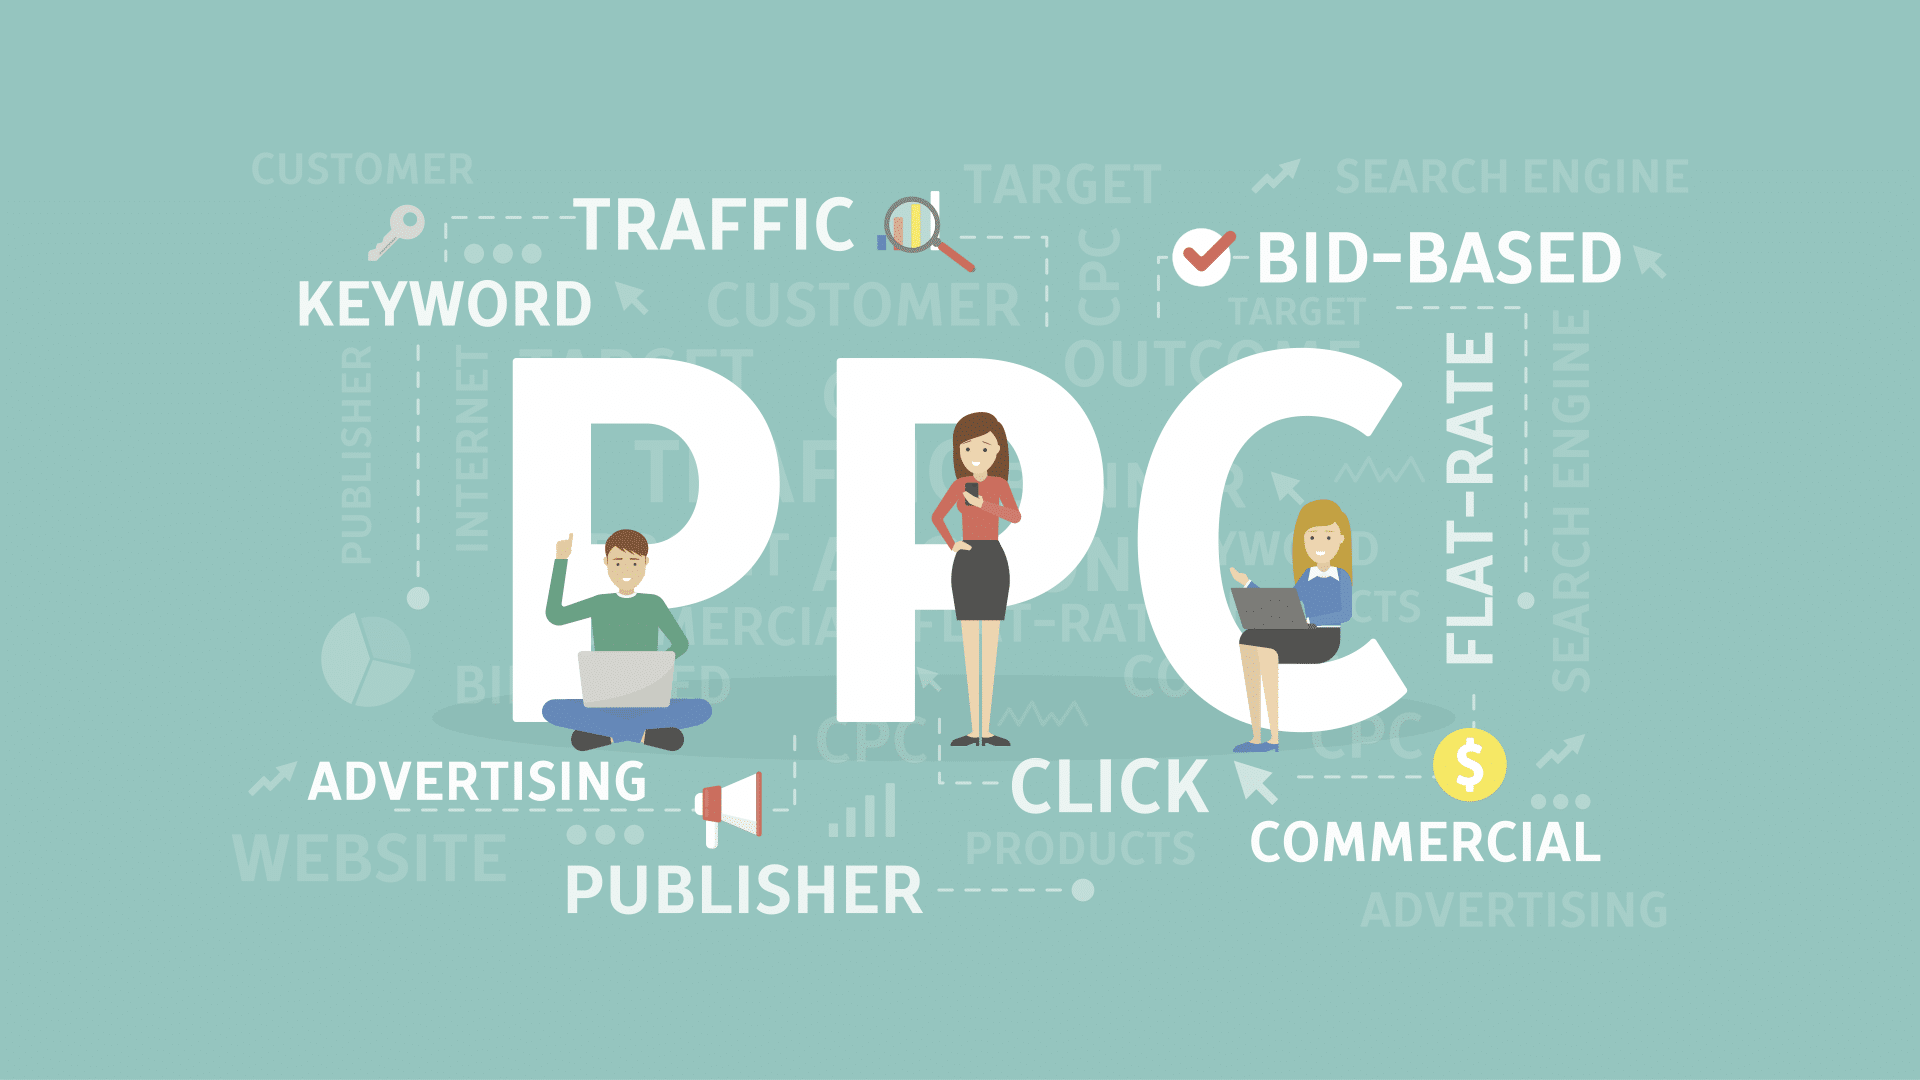 What Does PPC Stand For In Marketing?